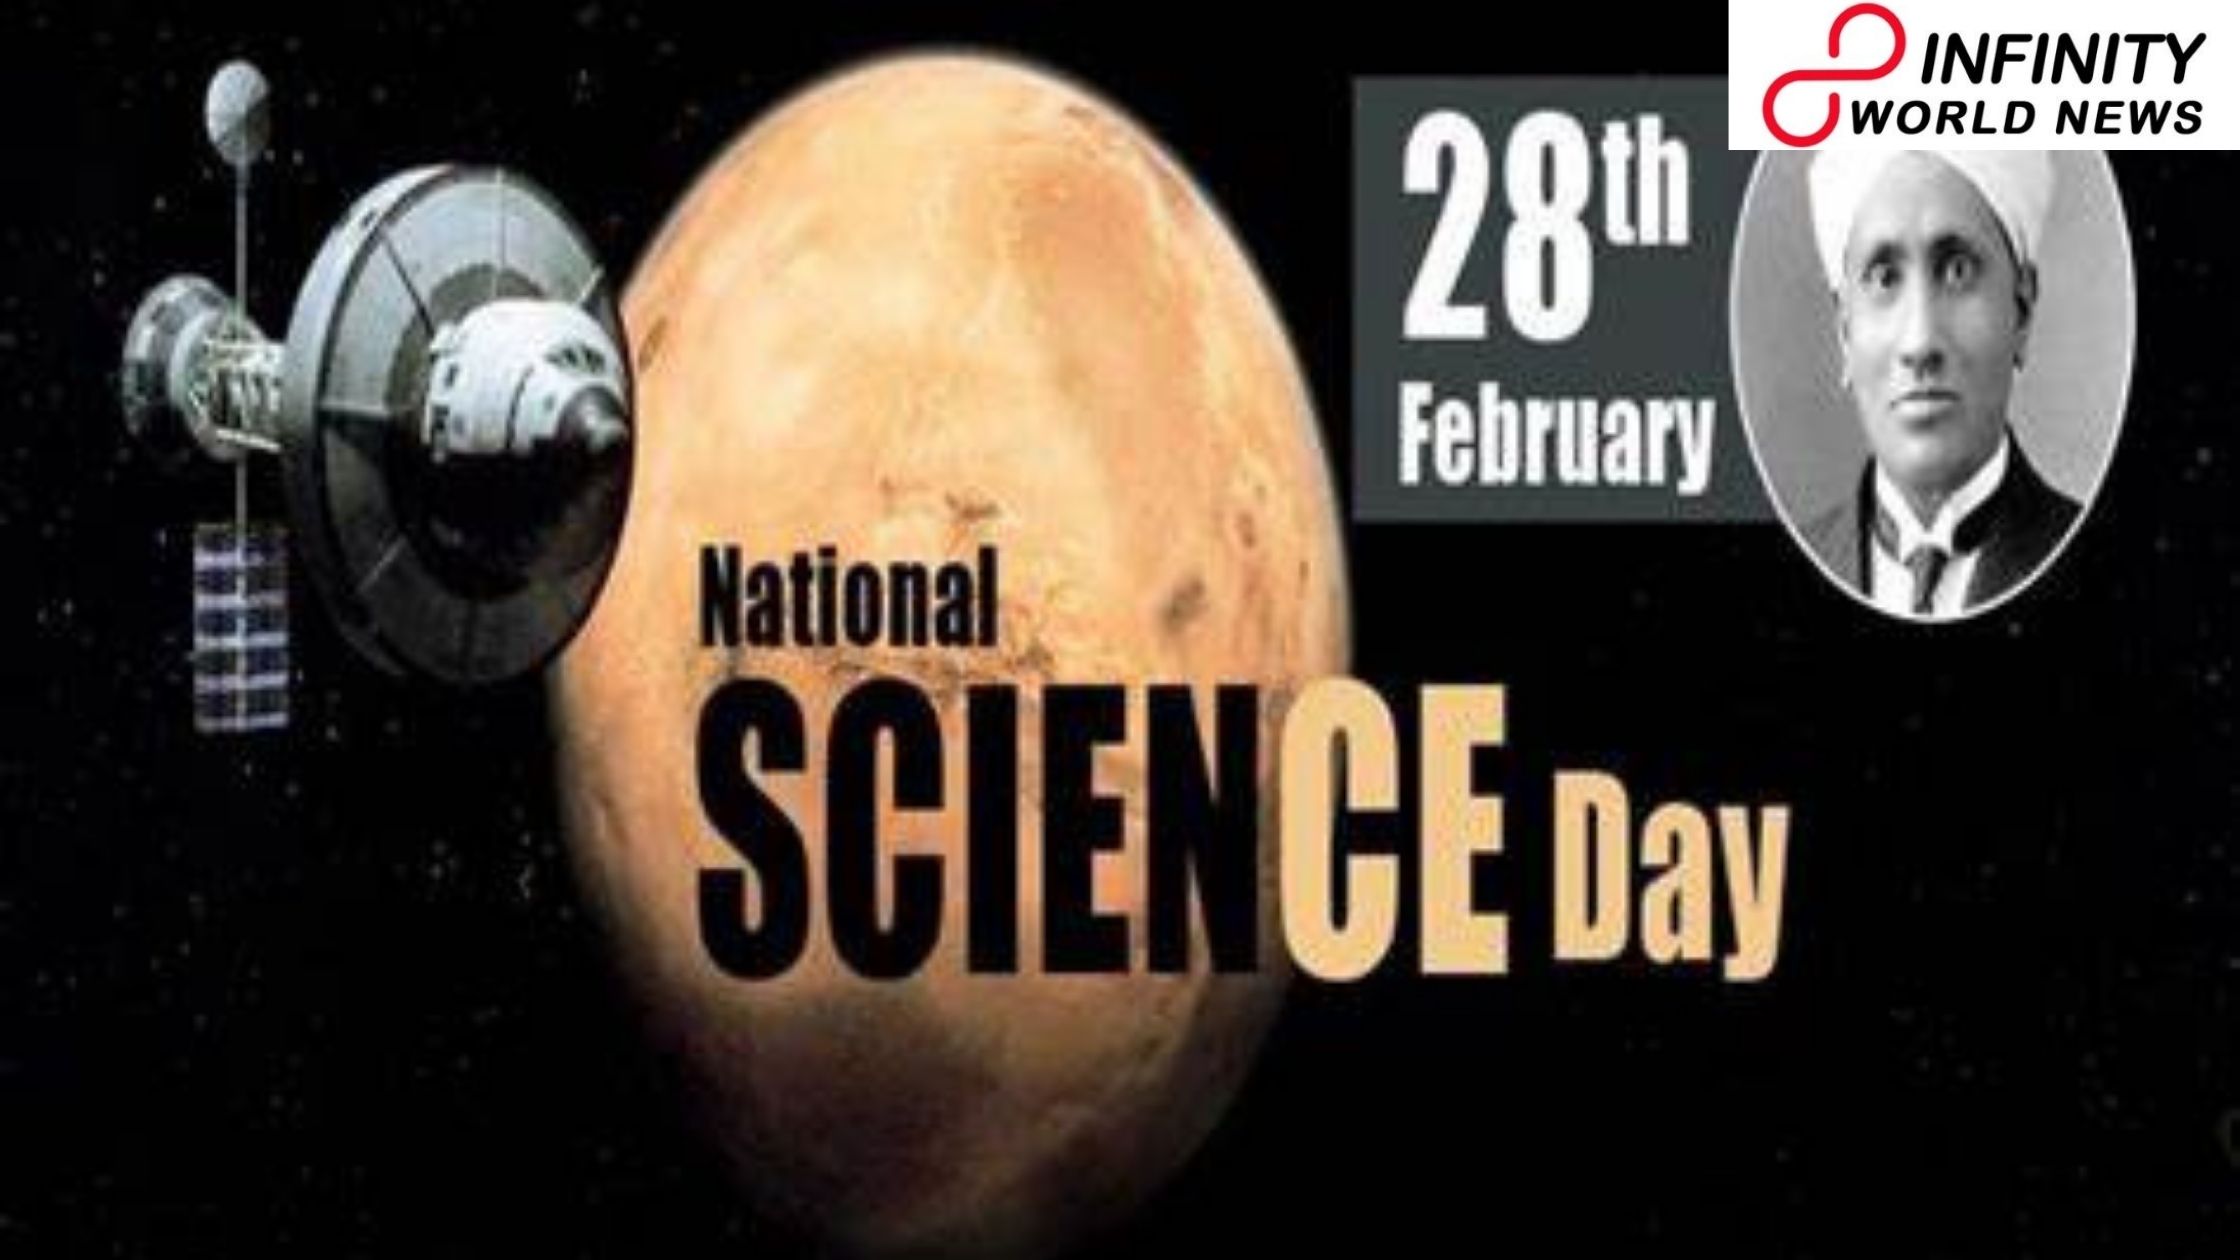 National Science Day being noticed today, Vice President, Prime Minister welcome country